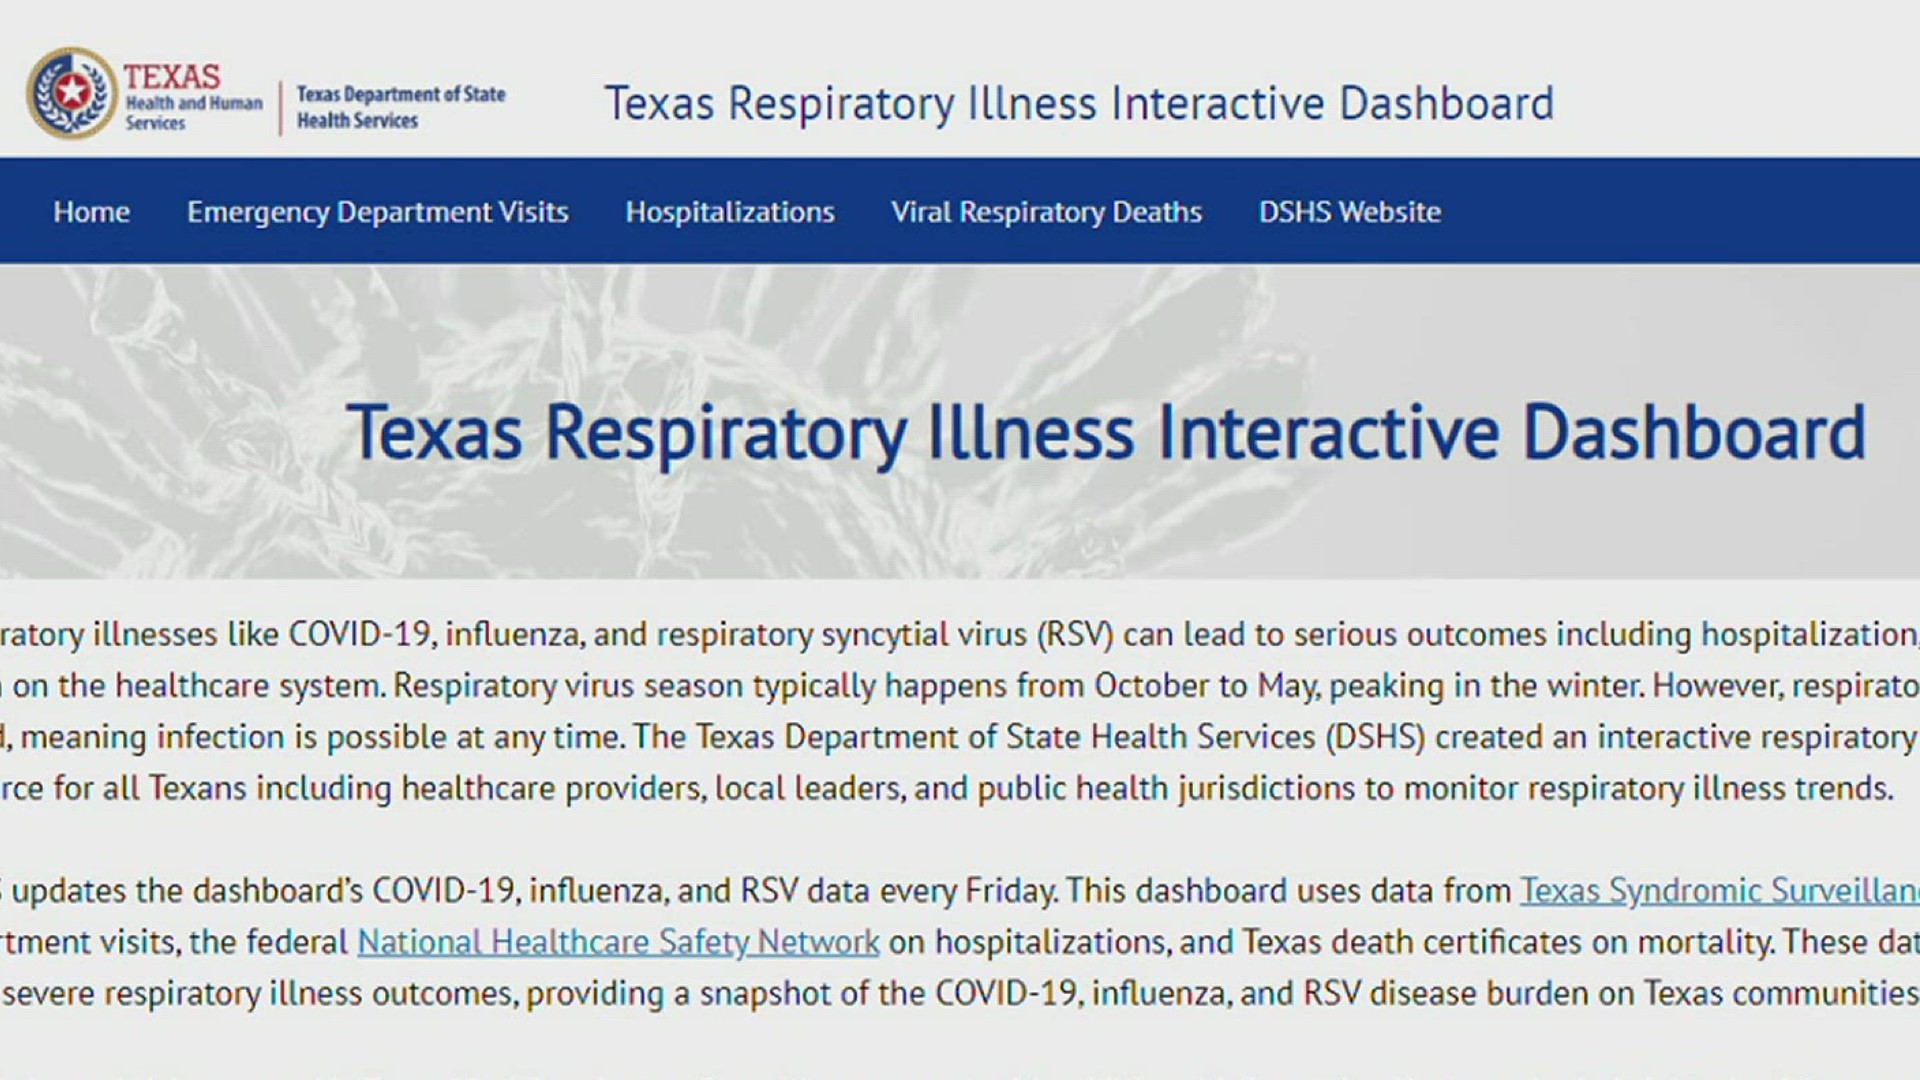 The respiratory virus dashboard is accessible through the Texas Department of State Health Services' Texas Health Data site.